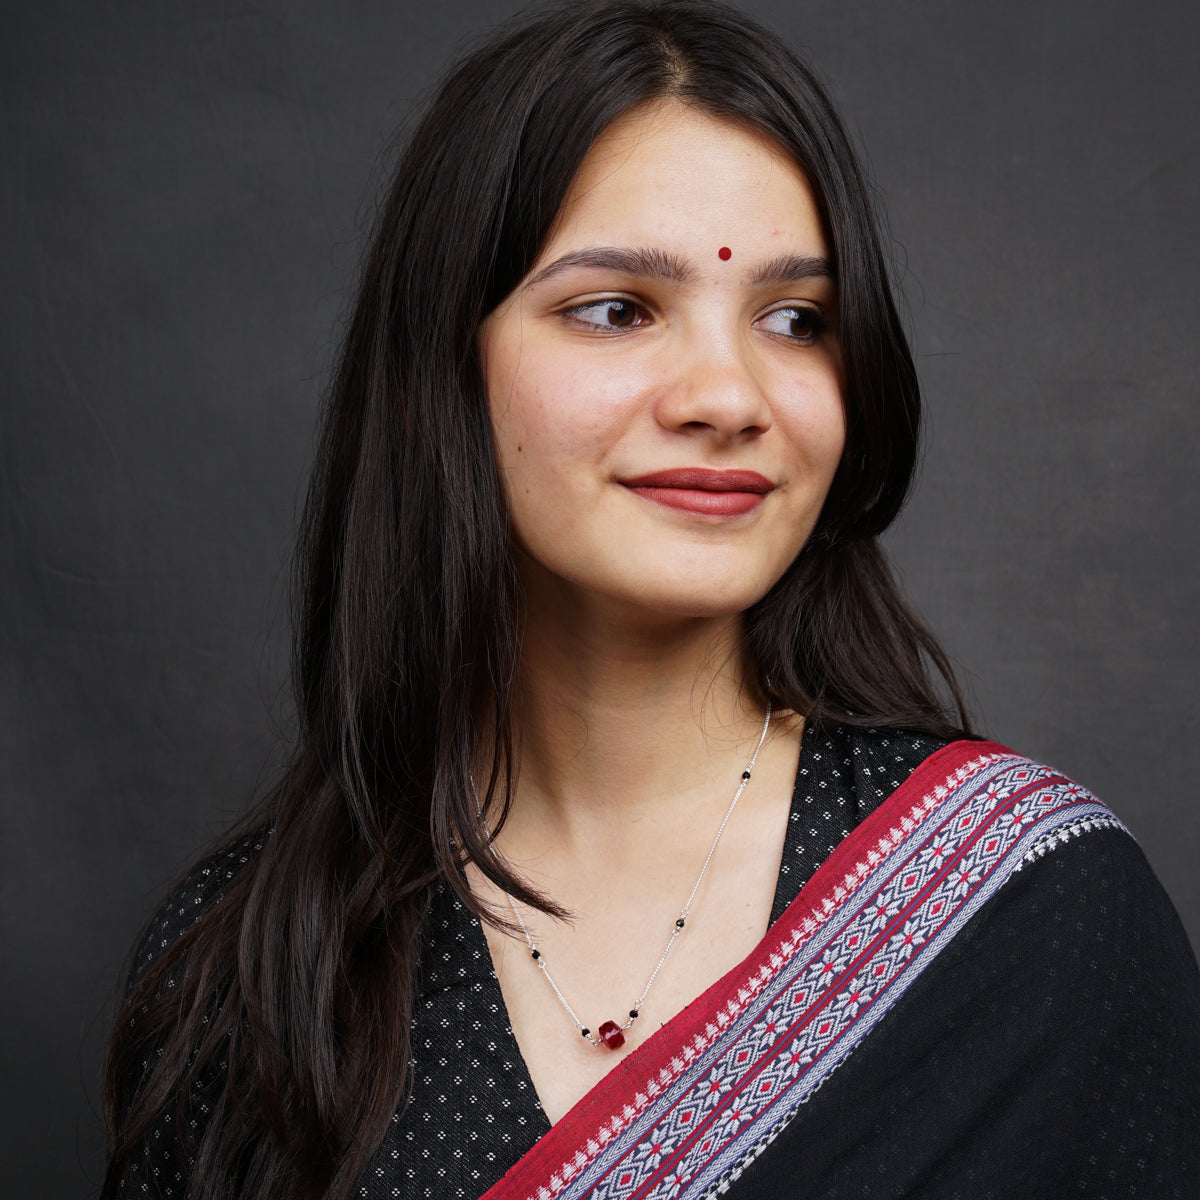 a woman in a black and red sari poses for a picture